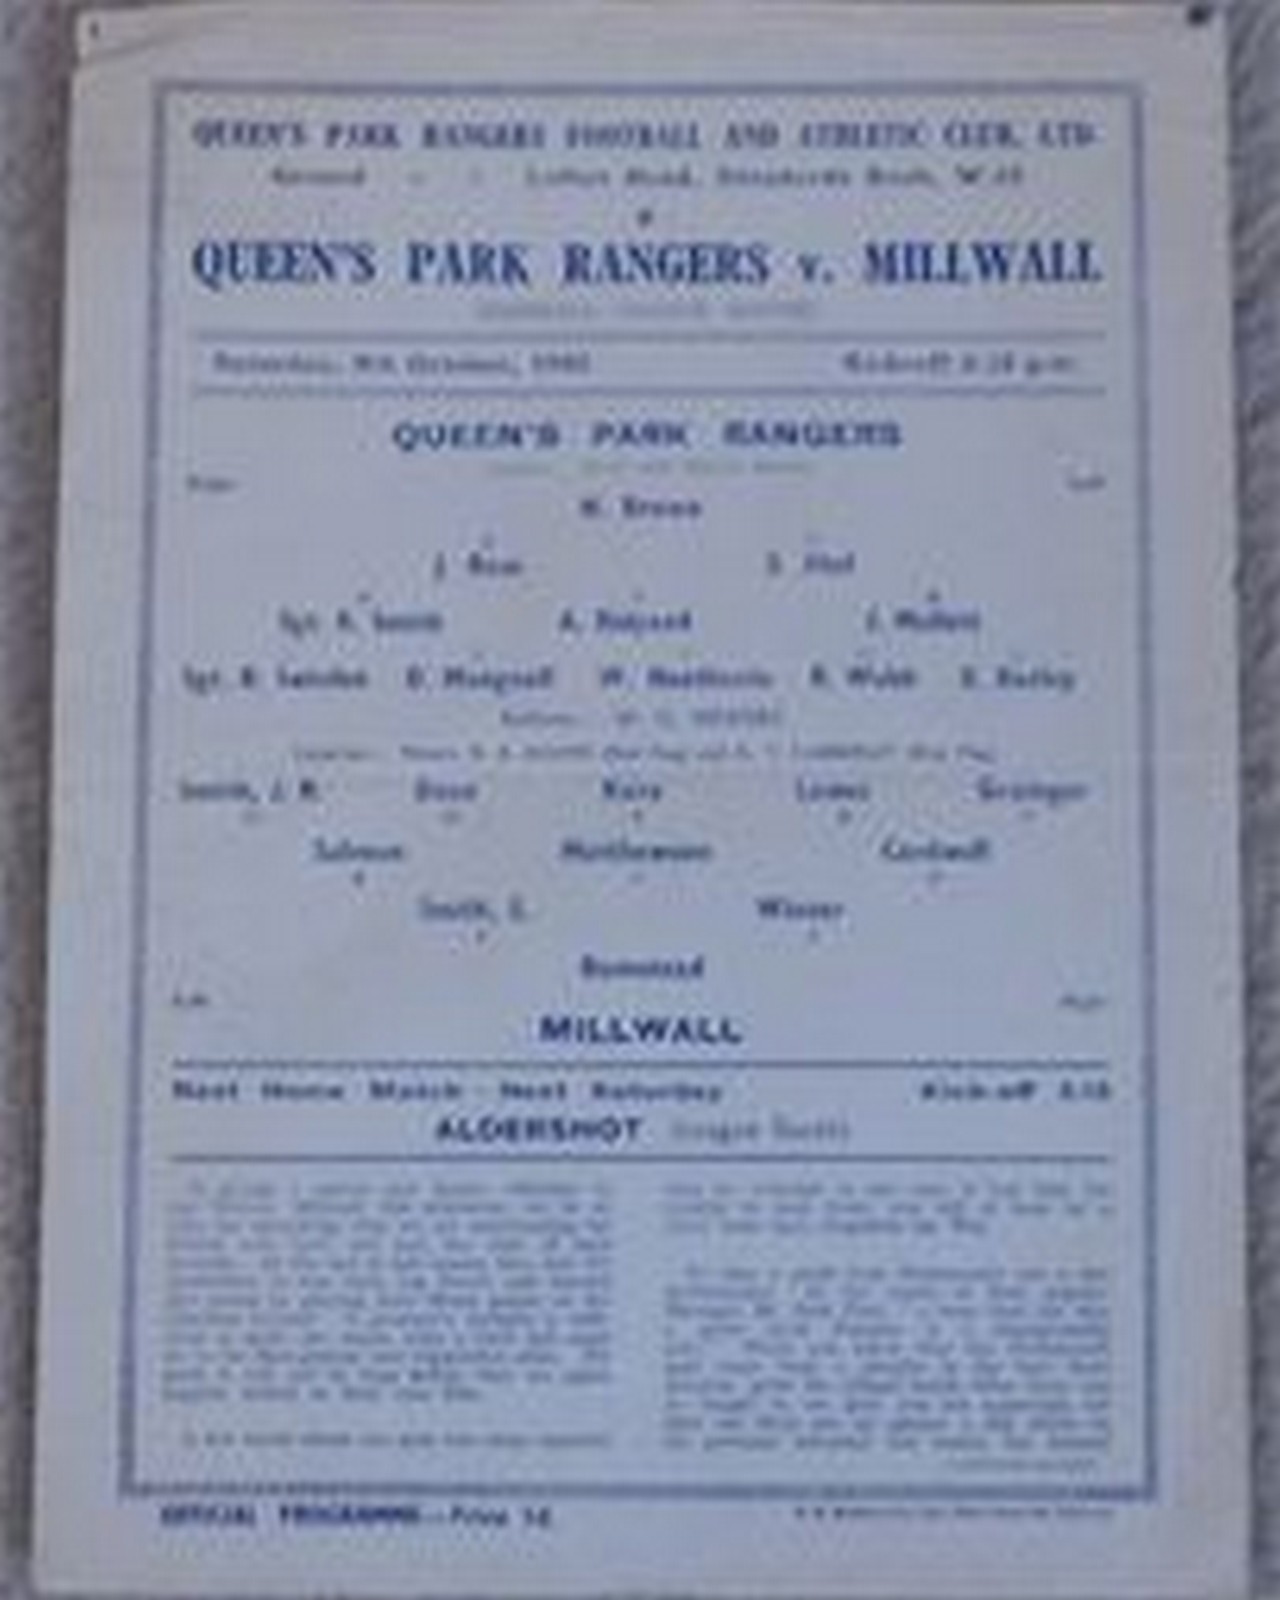 QPR V MILLWALL 1943/44 Rare s/s programme for this Football Lge South match Fair / Good